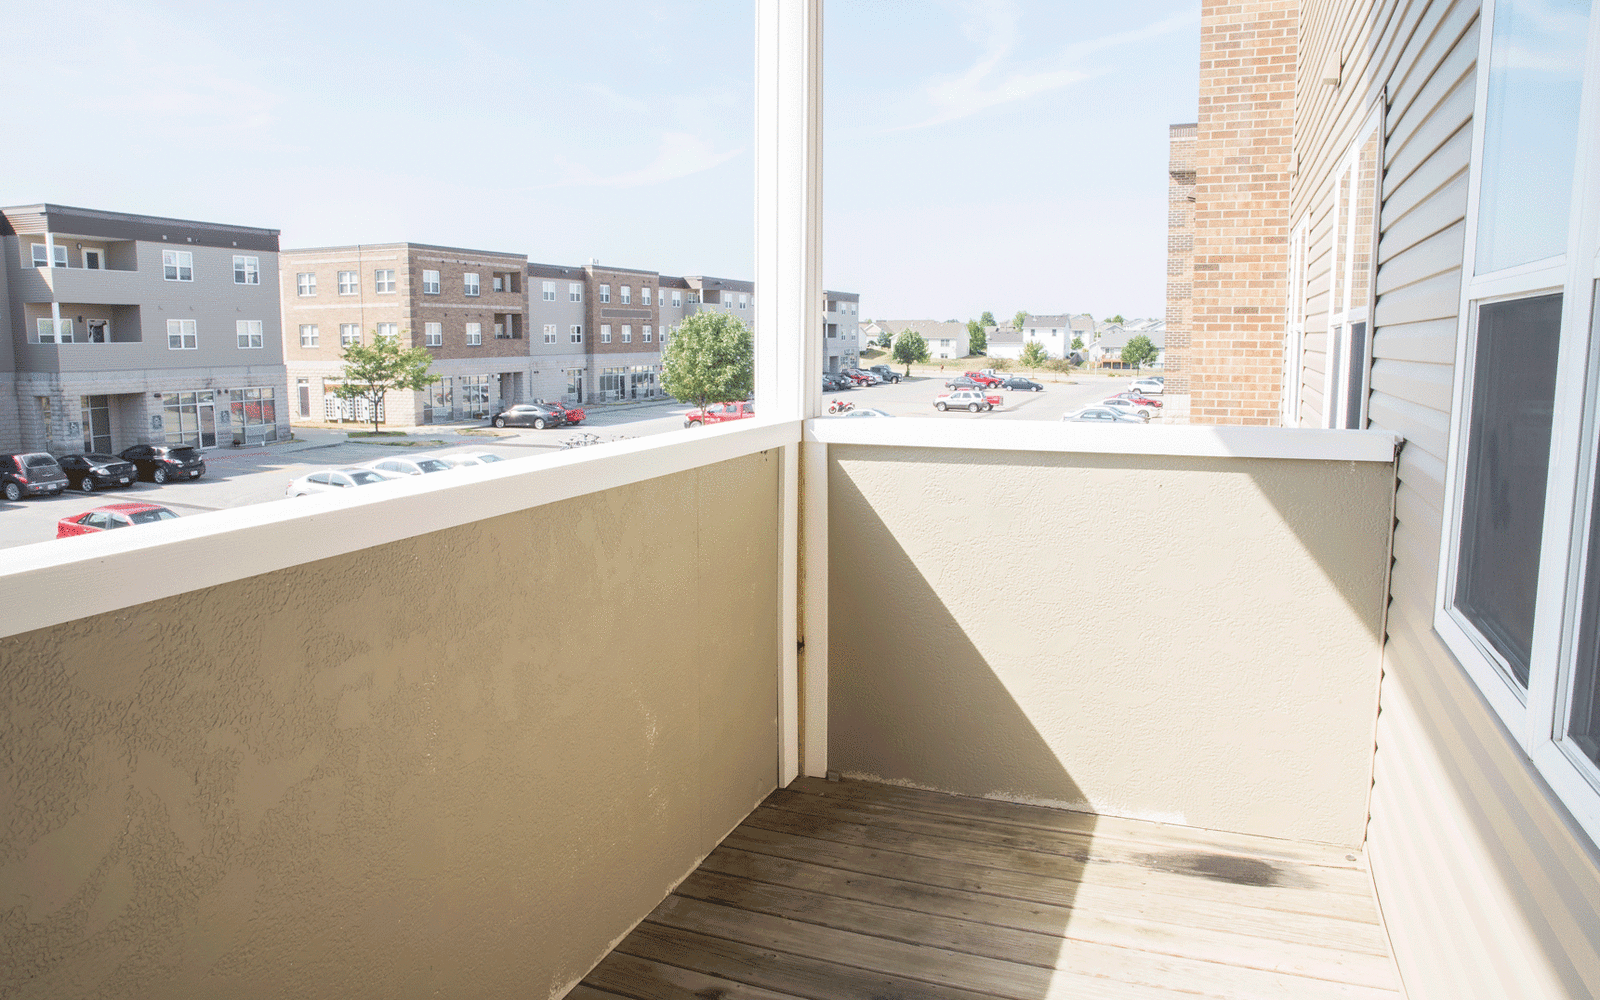 Apartment balcony at West Towne in Ames, Iowa